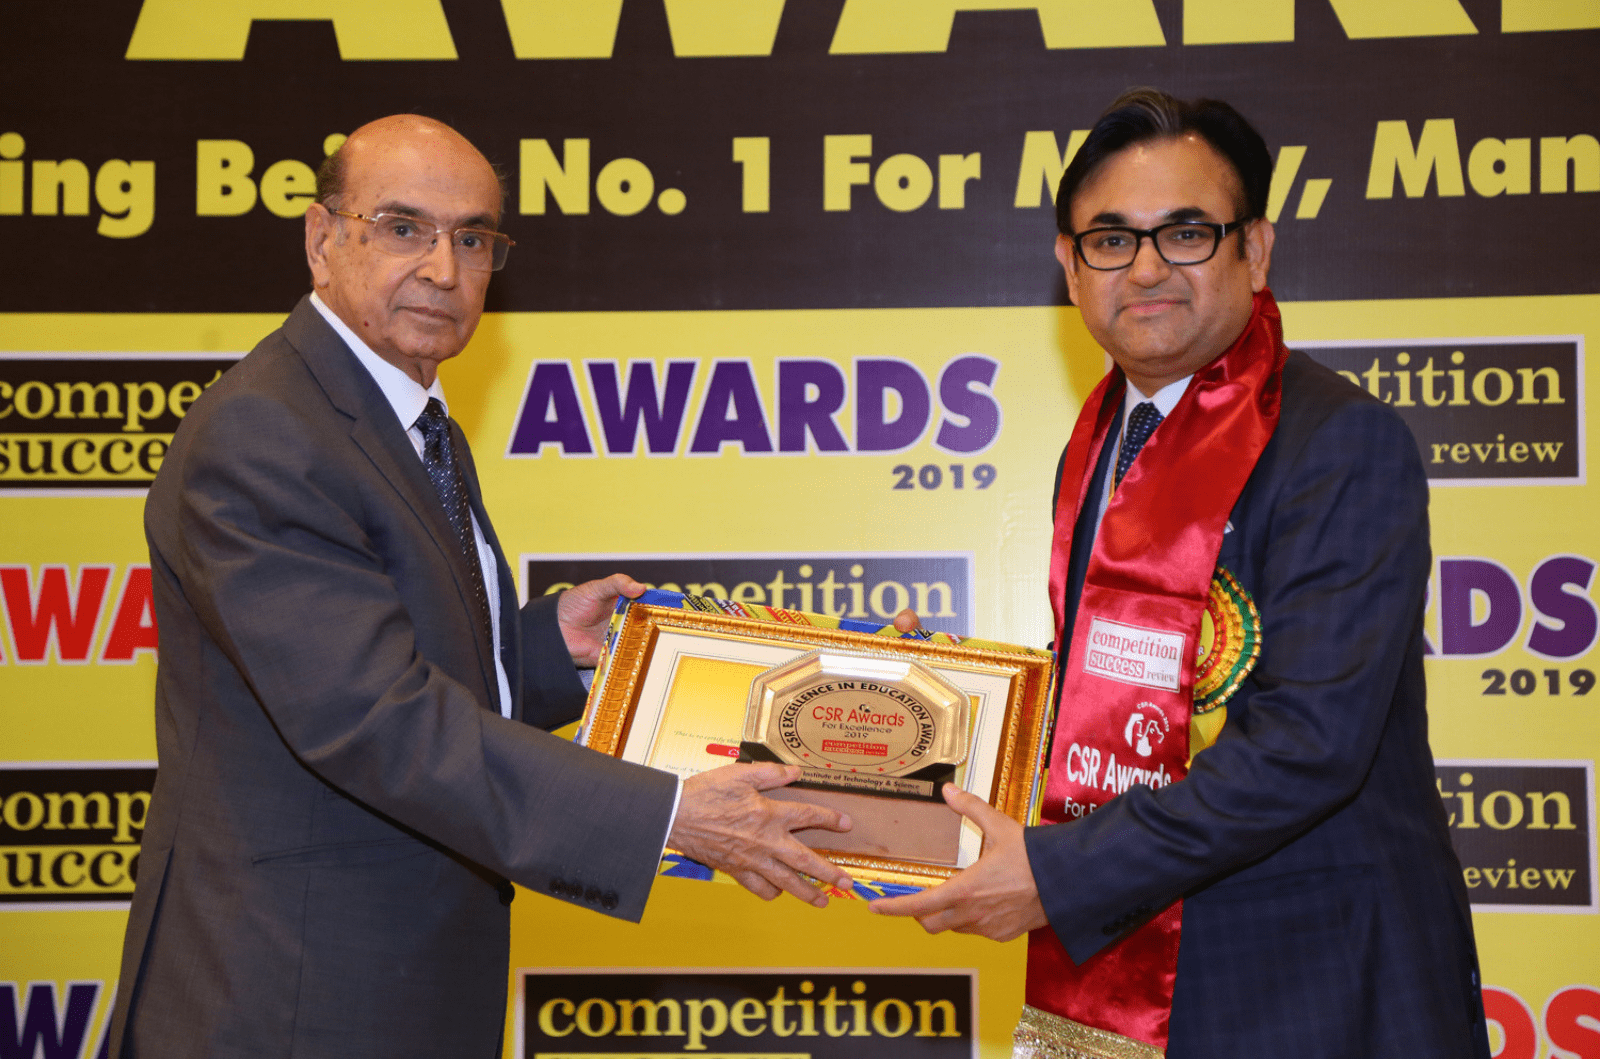 CSR Excellence in Education Award by Competition Success Review 